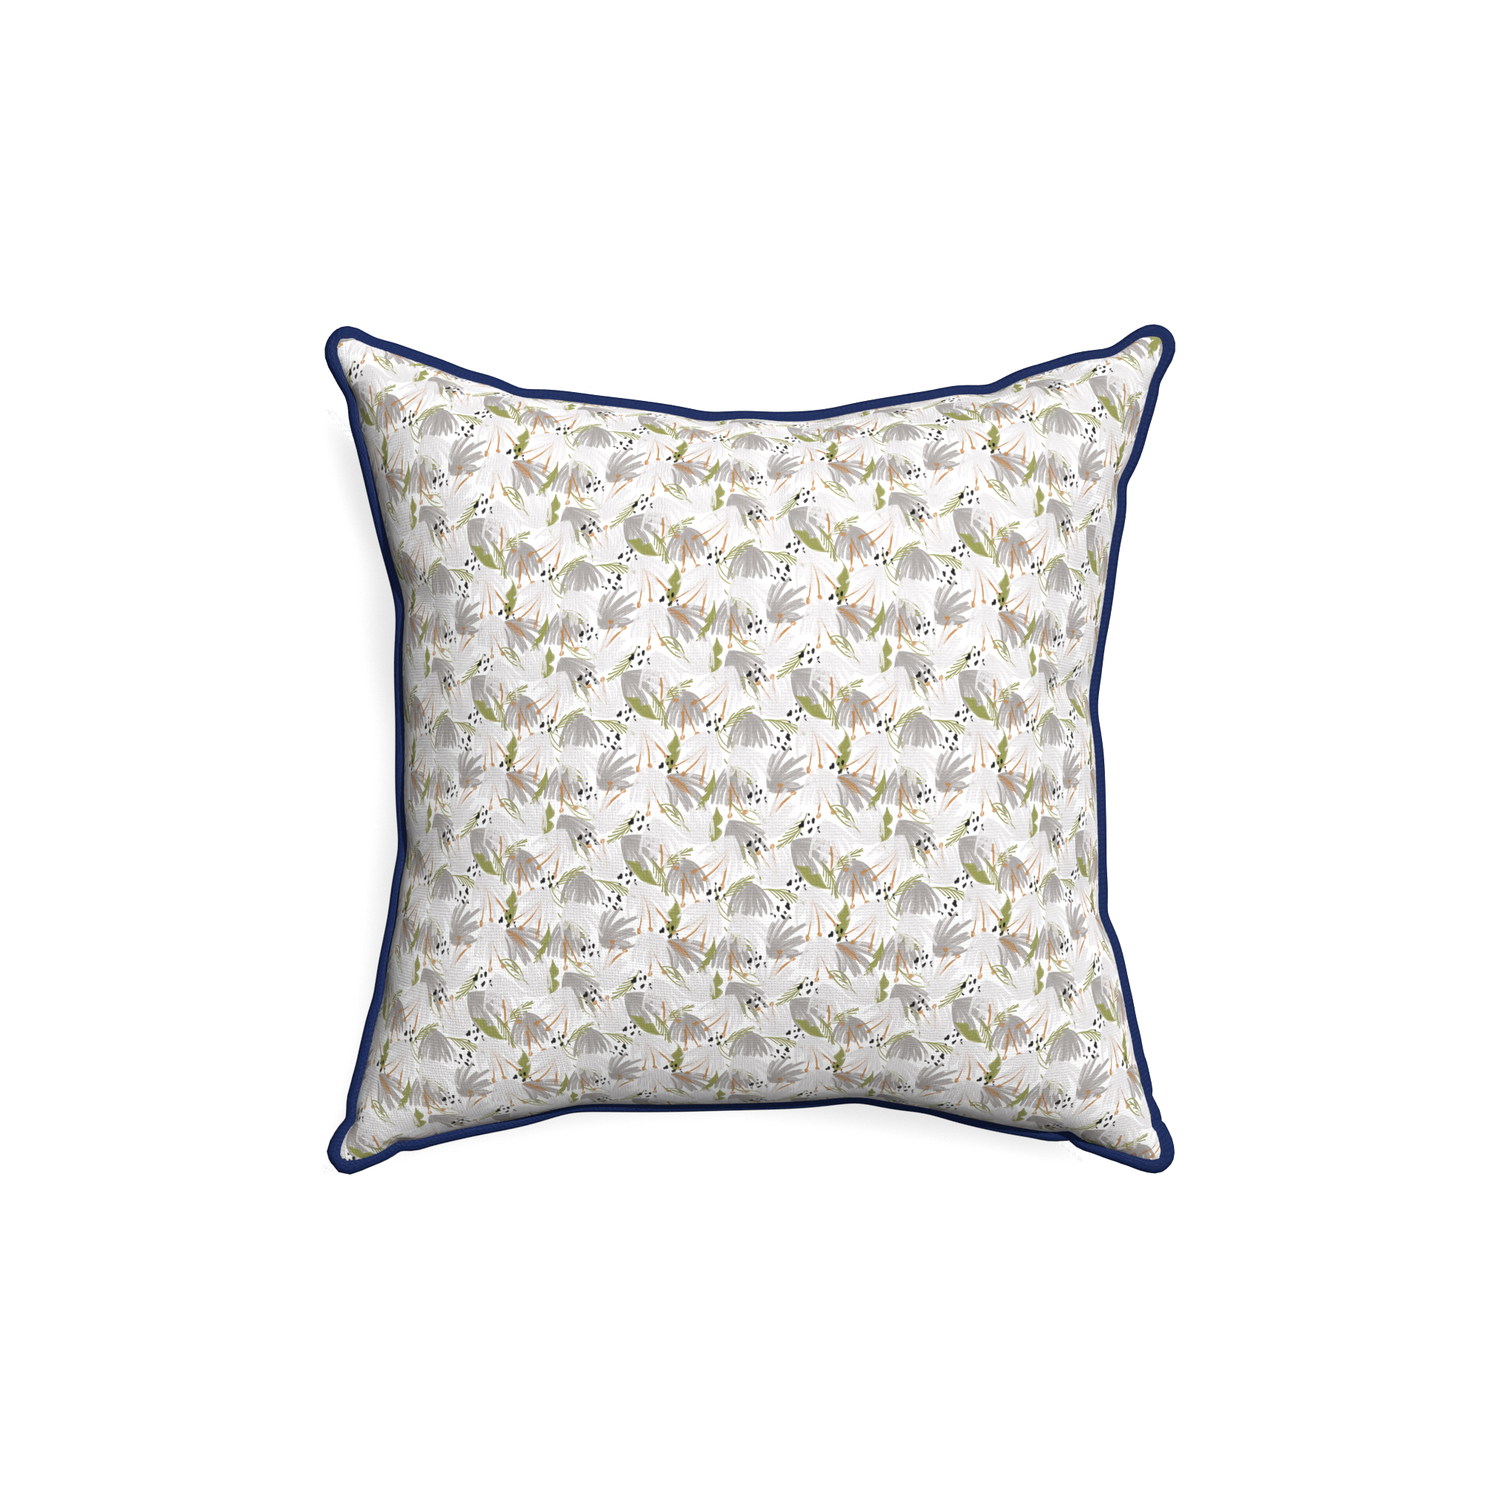 18-square eden grey custom grey floralpillow with midnight piping on white background